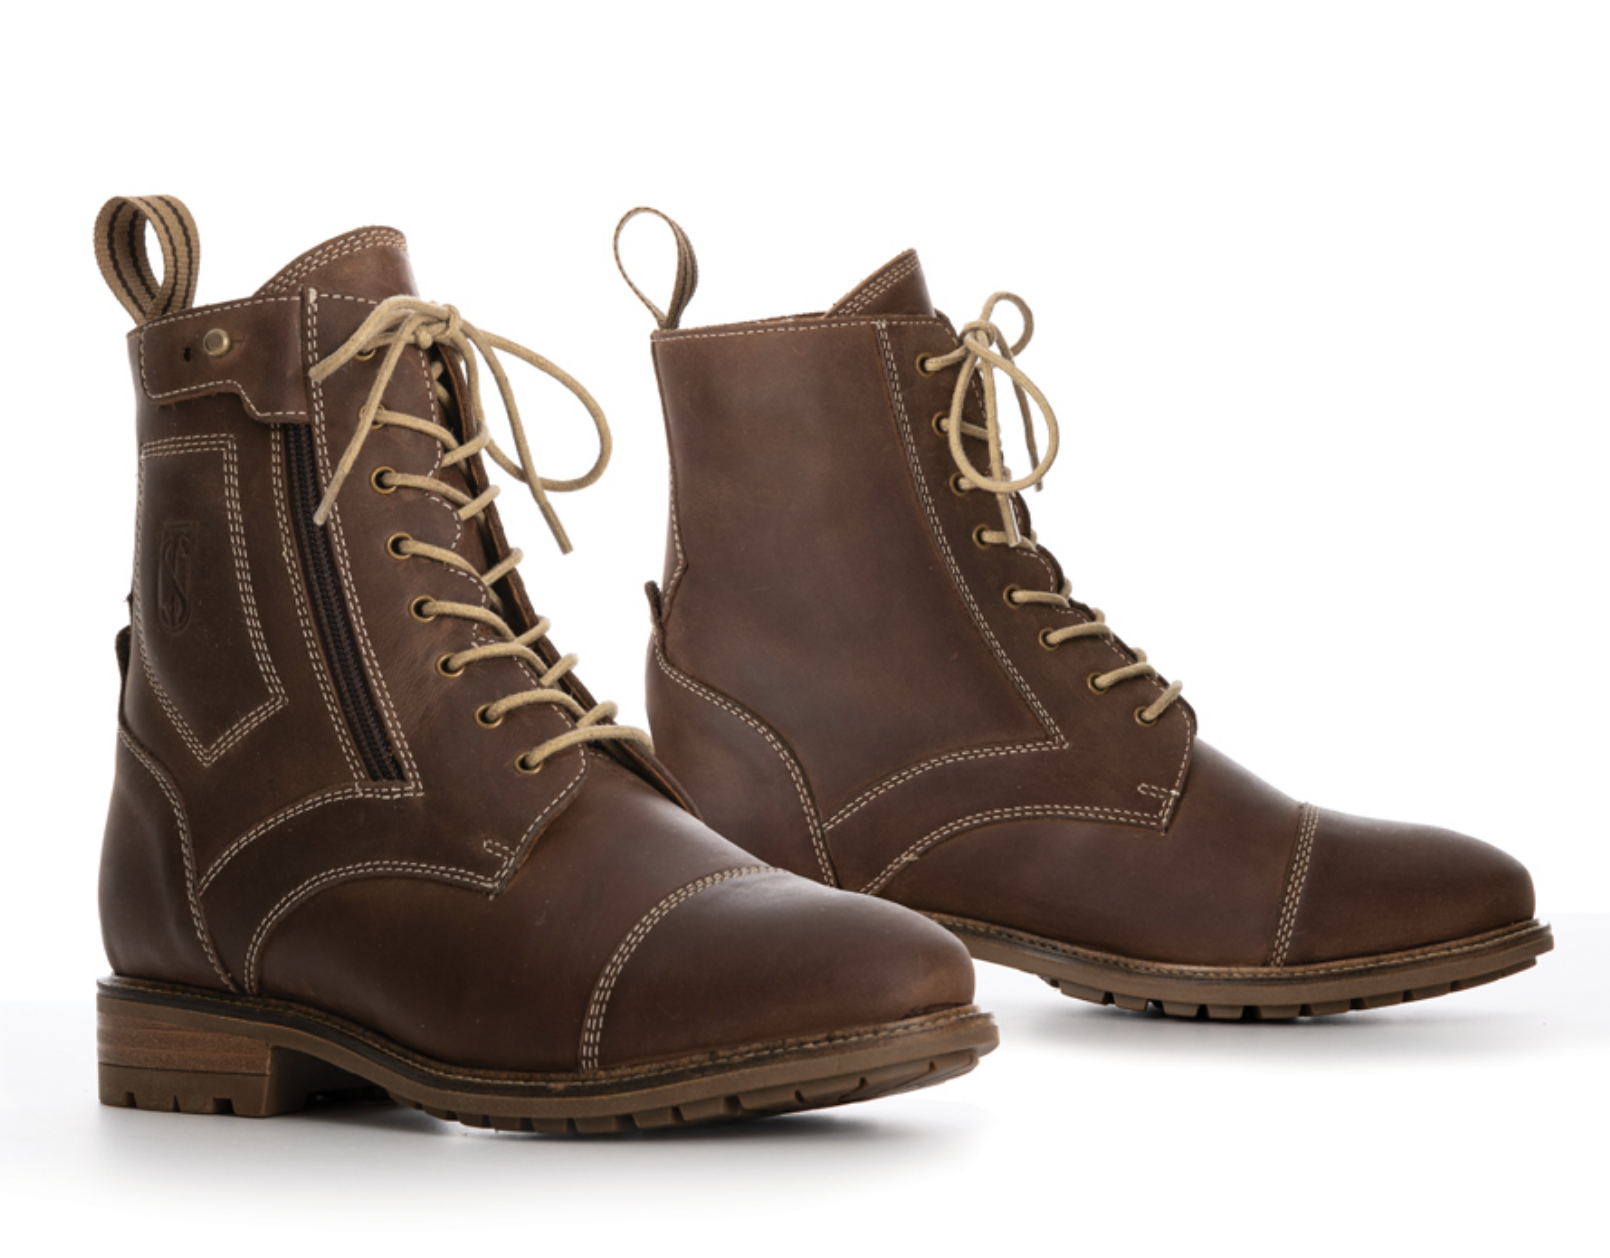 Tredstep Spirit Side Zip Country Boots 